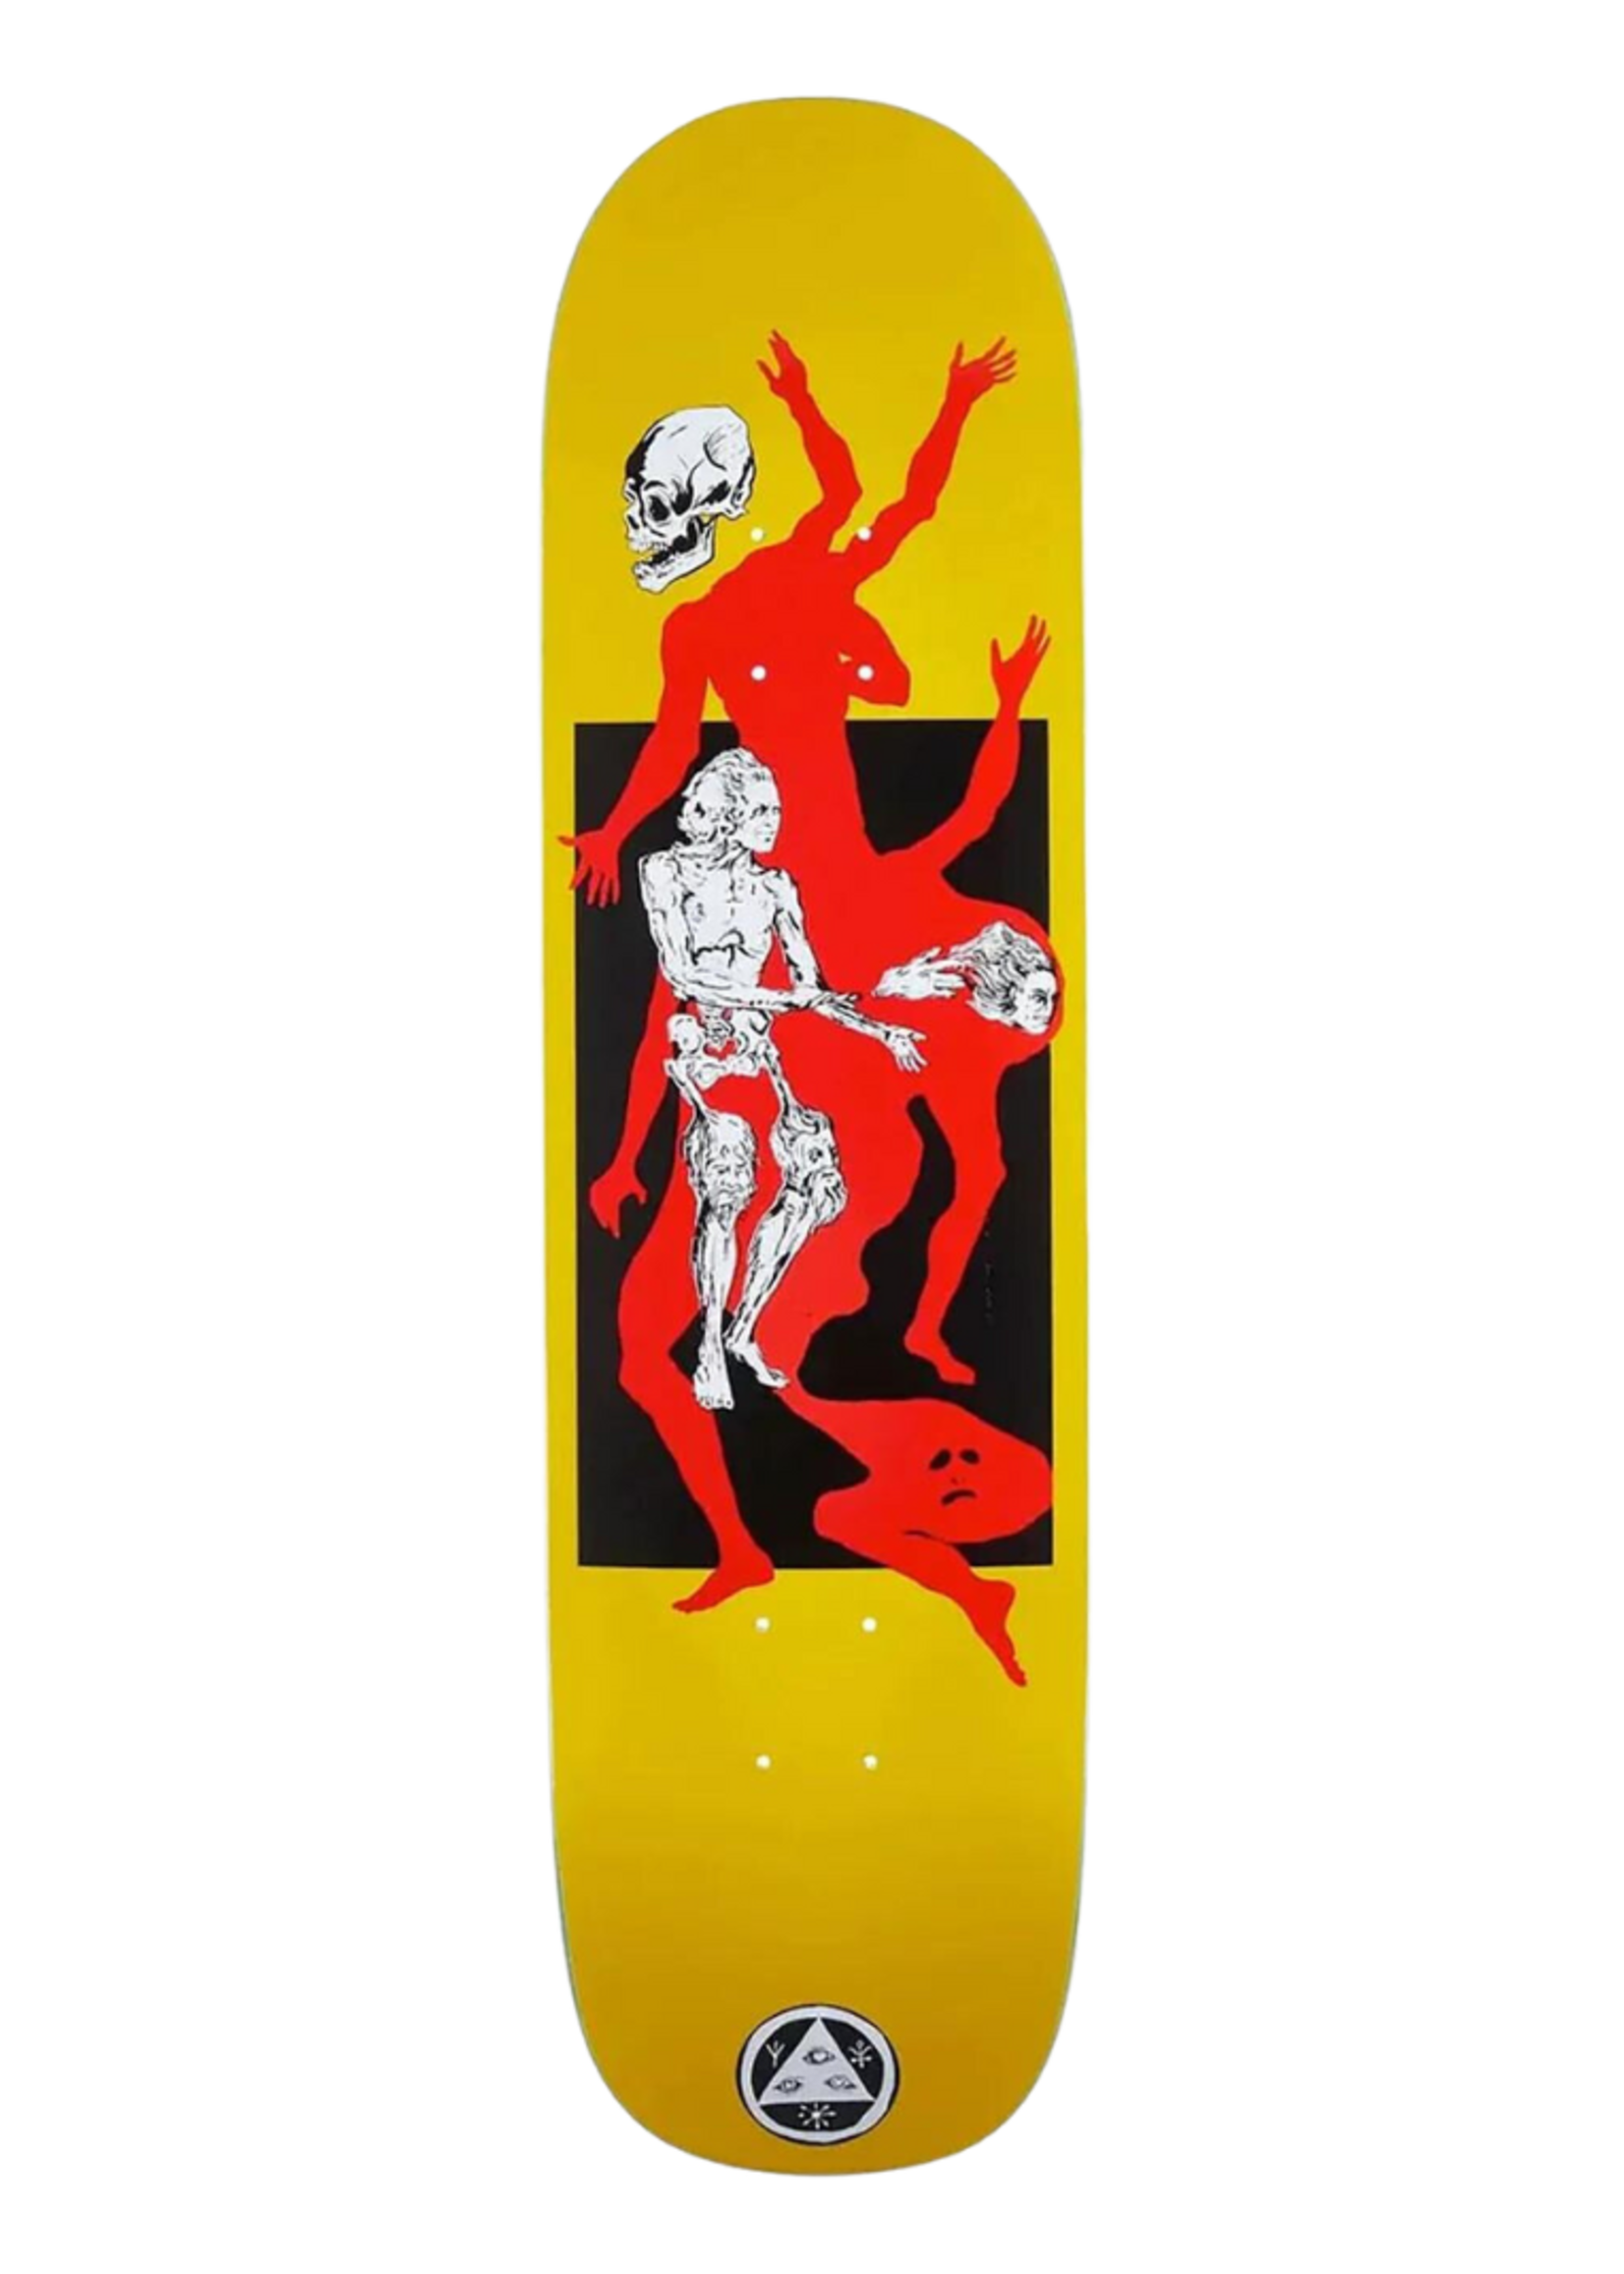 WELCOME THE MAGICIAN ON SON OF PLANCHETTE 8.38" DECK